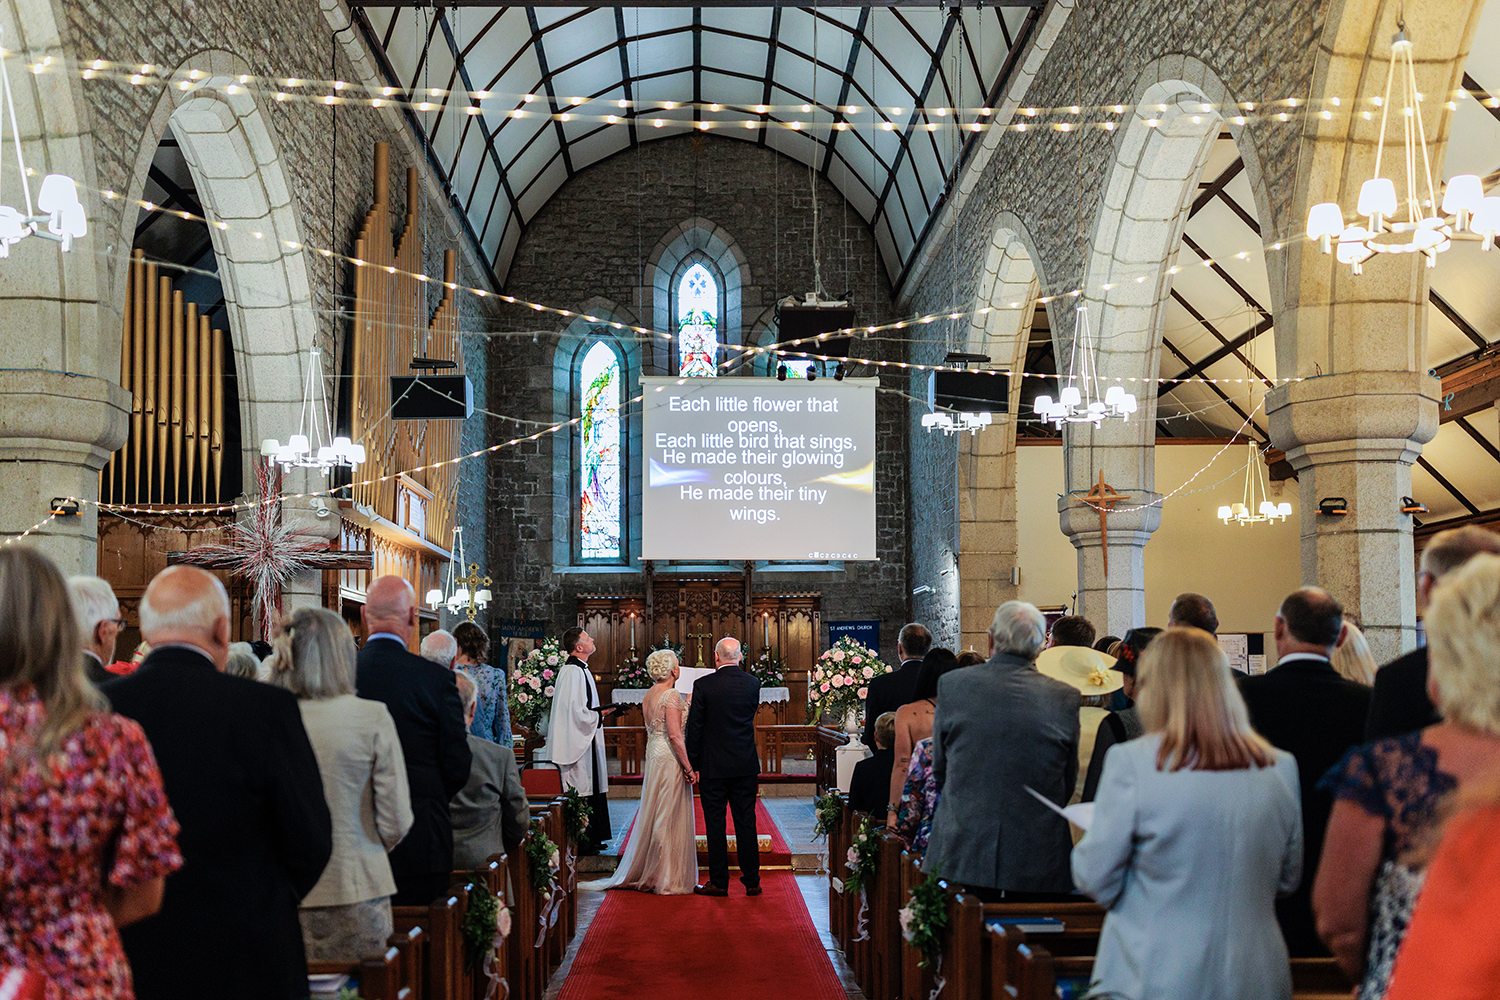 The bride and groom and congregation sing hymns at their wedding ceremony at St Andrew's Church, St Helier Jersey CI